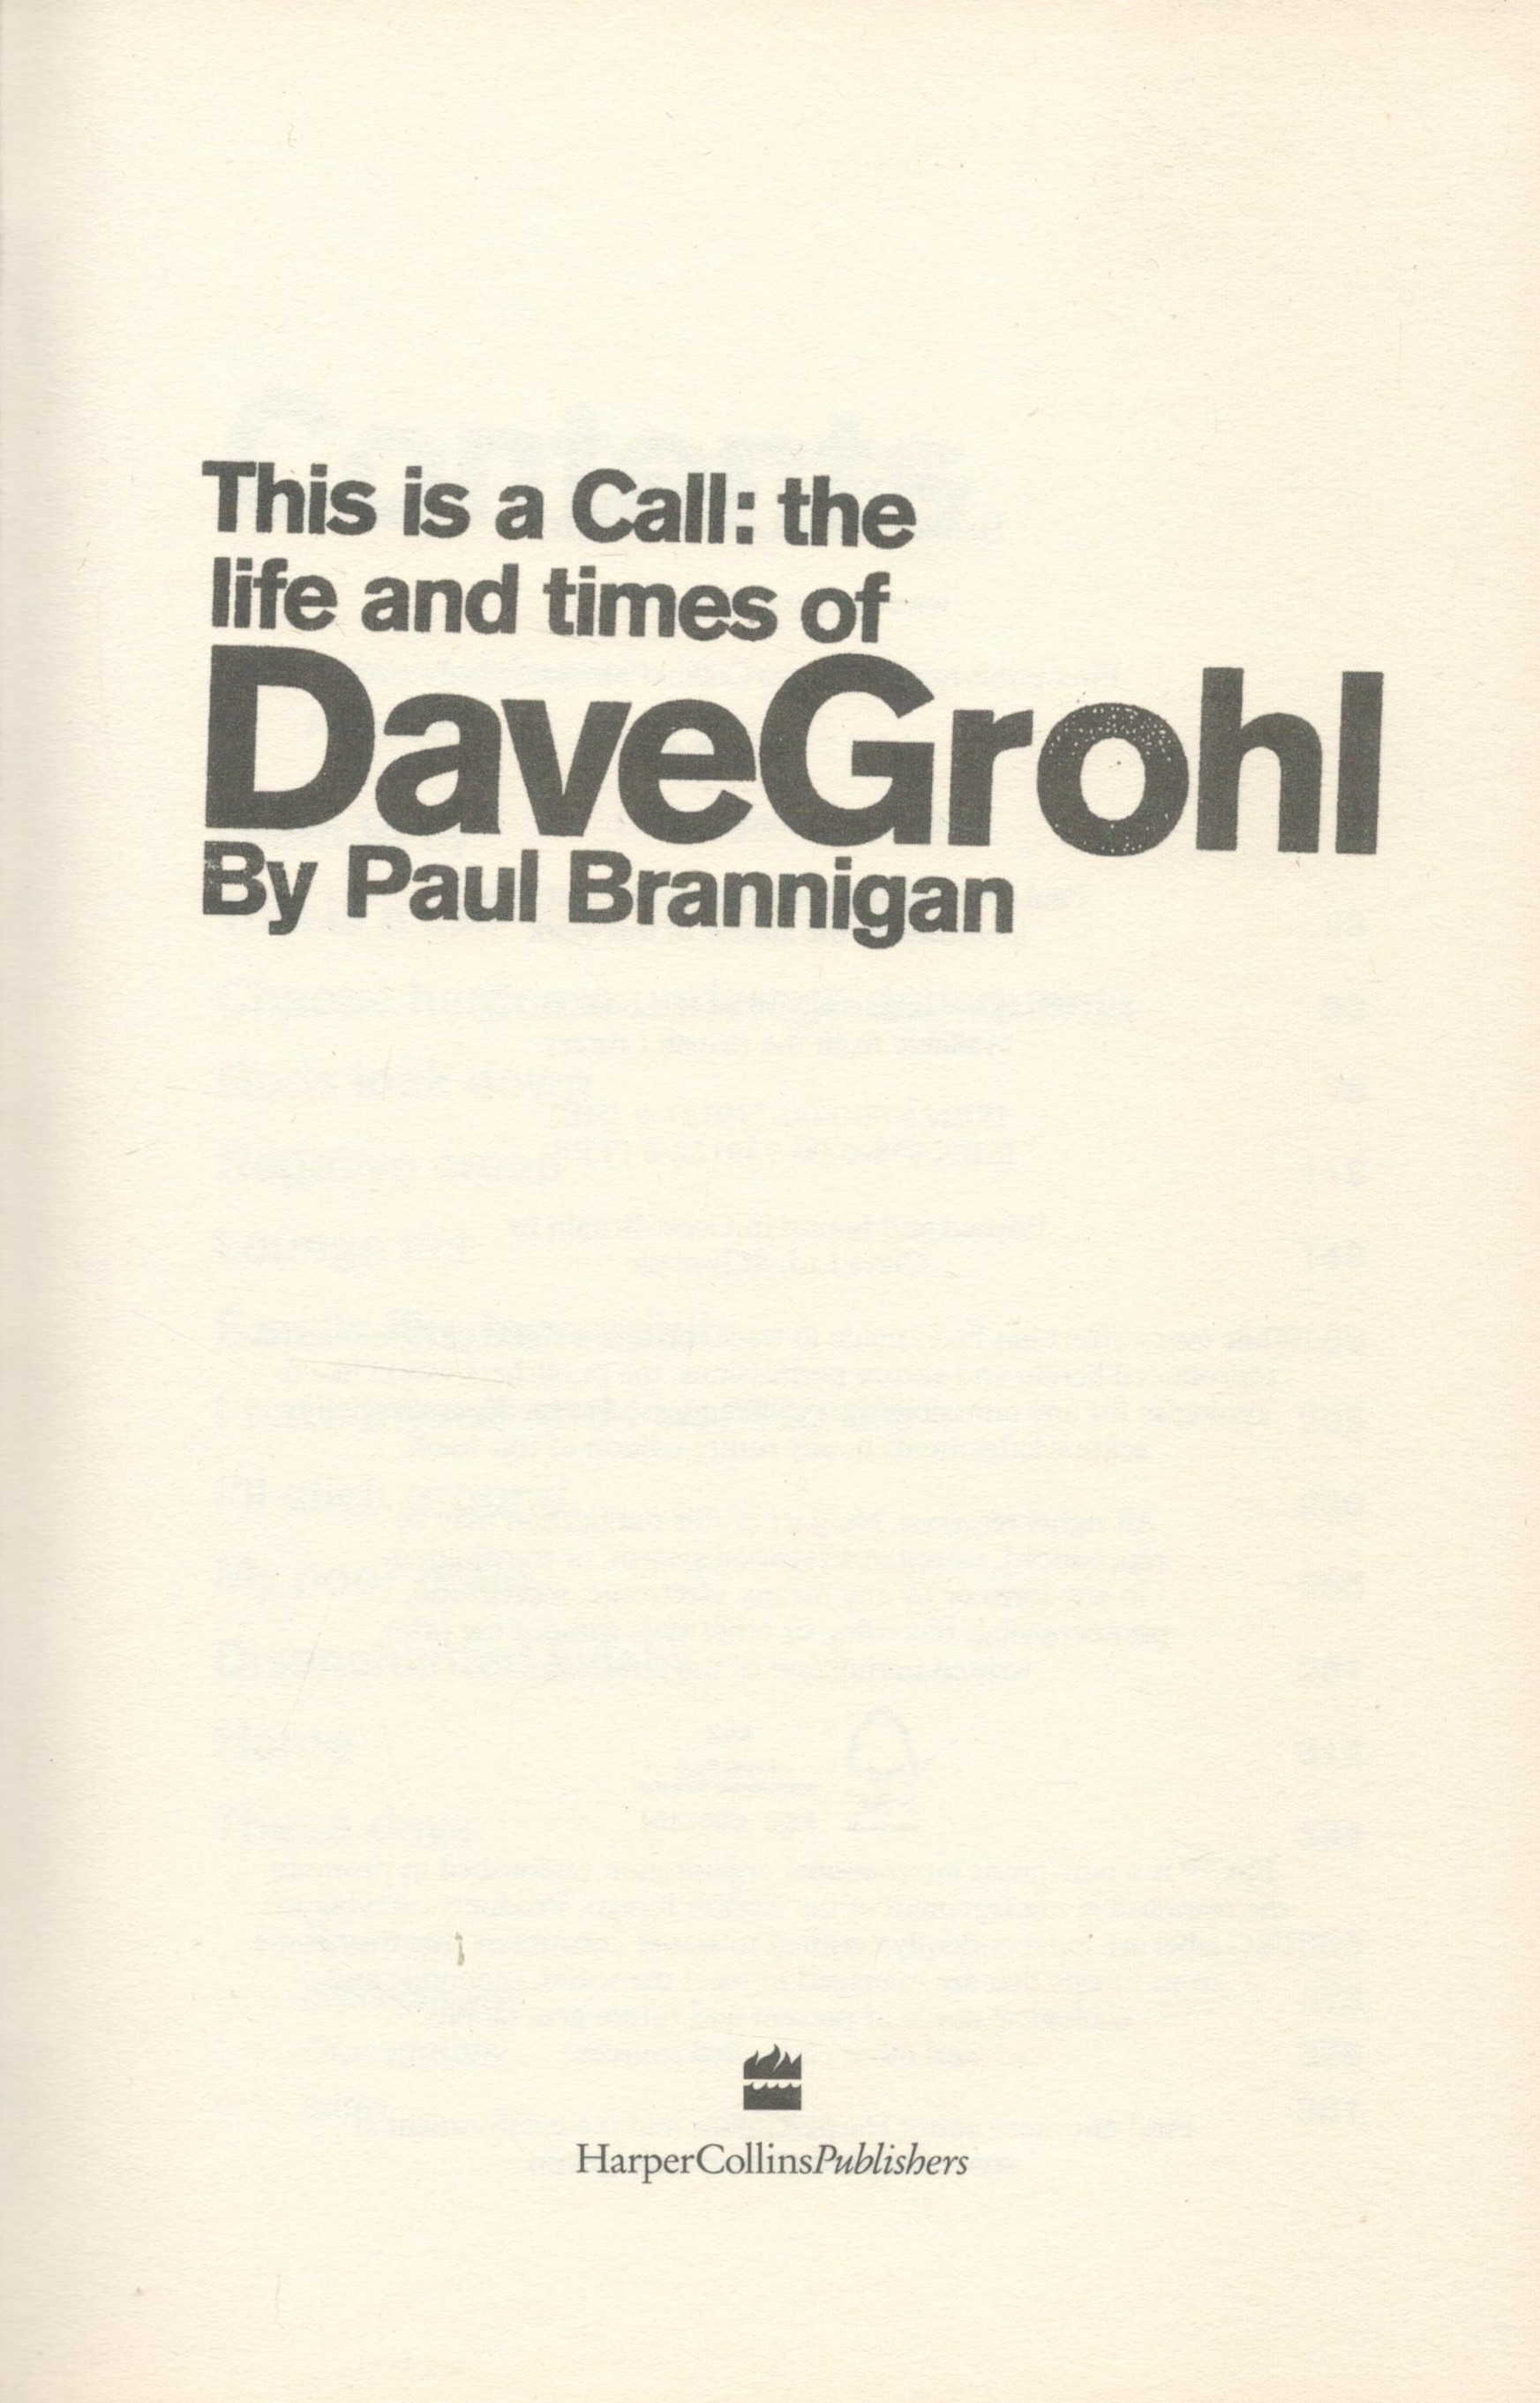 This Is A Call: the Life and Times of Dave Grohl by Paul Brannigan 2011 First Edition Hardback - Image 2 of 3